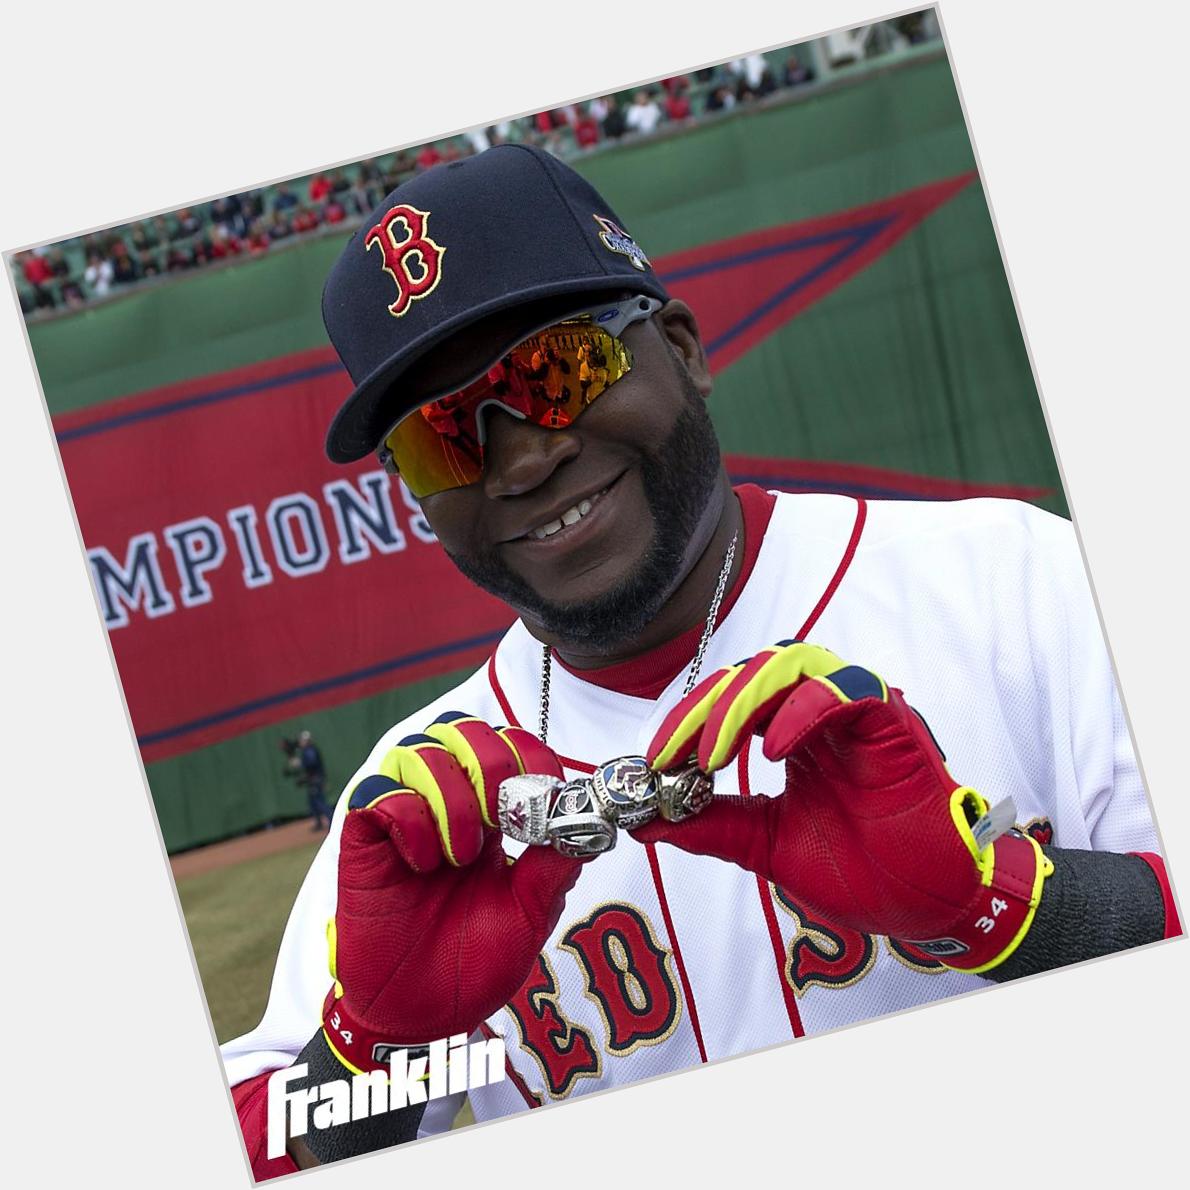 Happy Birthday to Franklin Pro Check out his Custom Batting Glove profile here:  